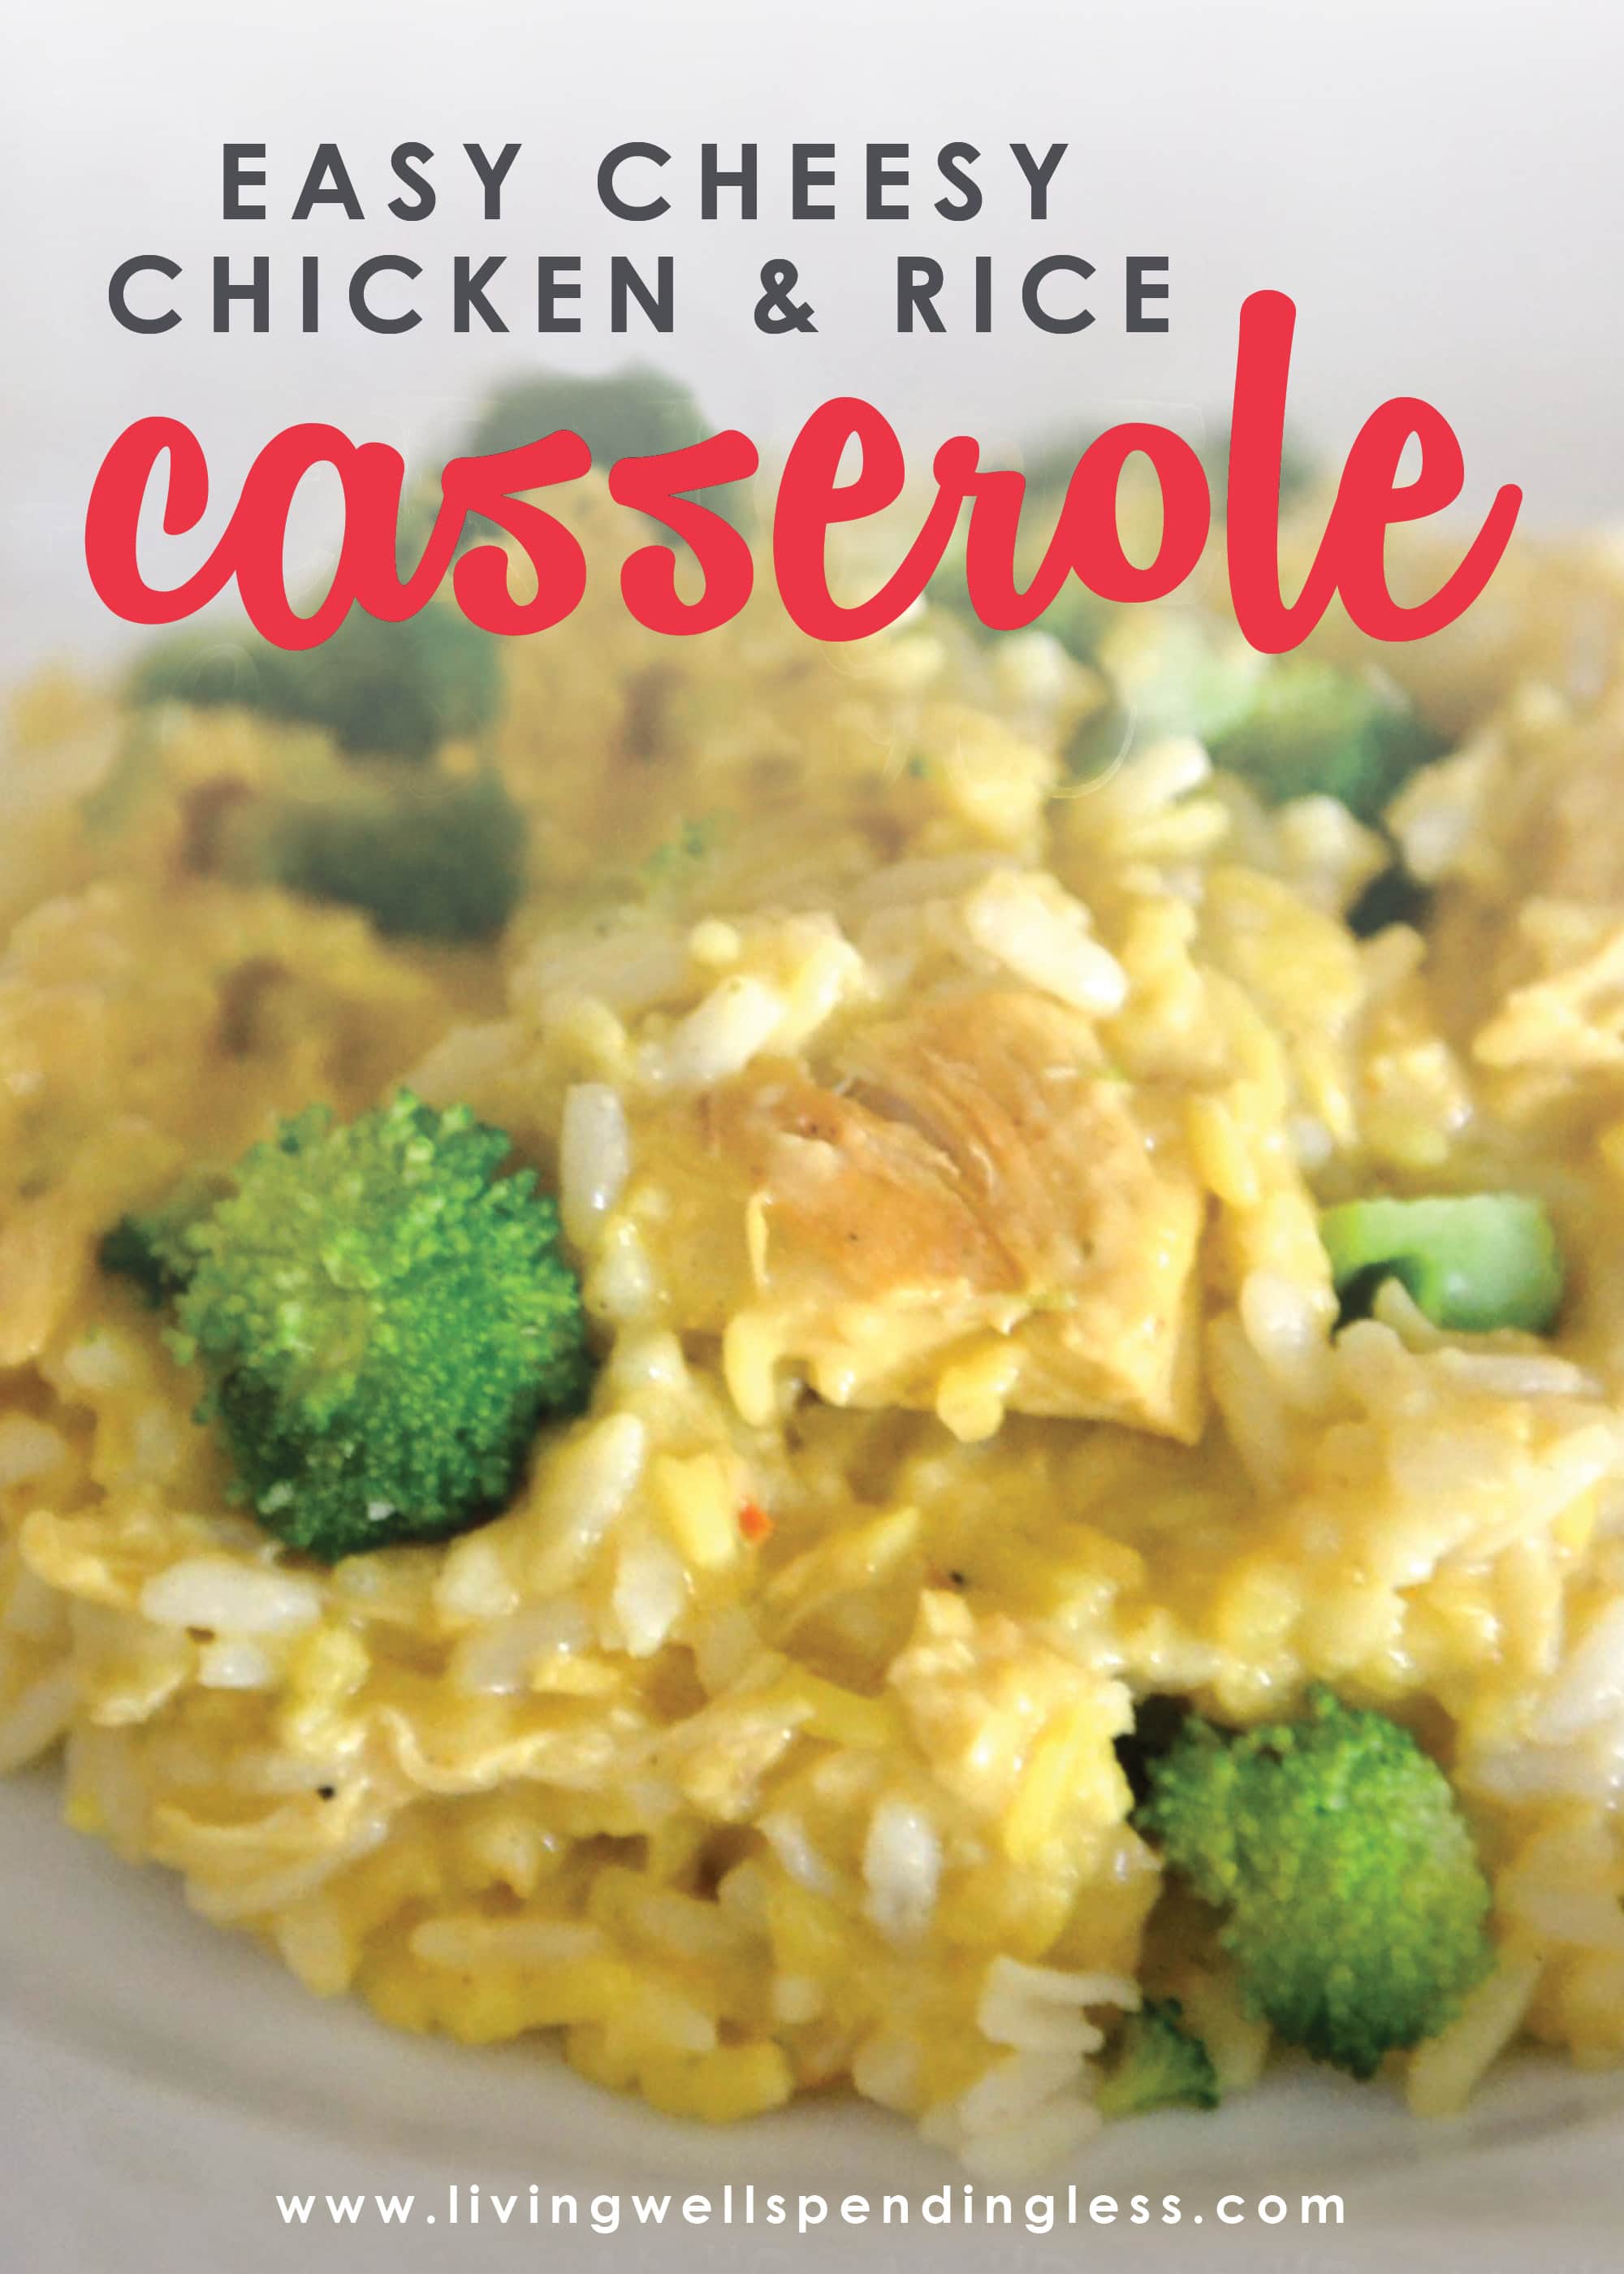 Everyone's favorite casserole is now freezer-friendly! This oh-so-yummy one-dish meal comes together in just a few minutes using pantry staples and leftover chicken (or turkey), then freezes ahead for busy weeknights. The ultimate comfort food just got better!